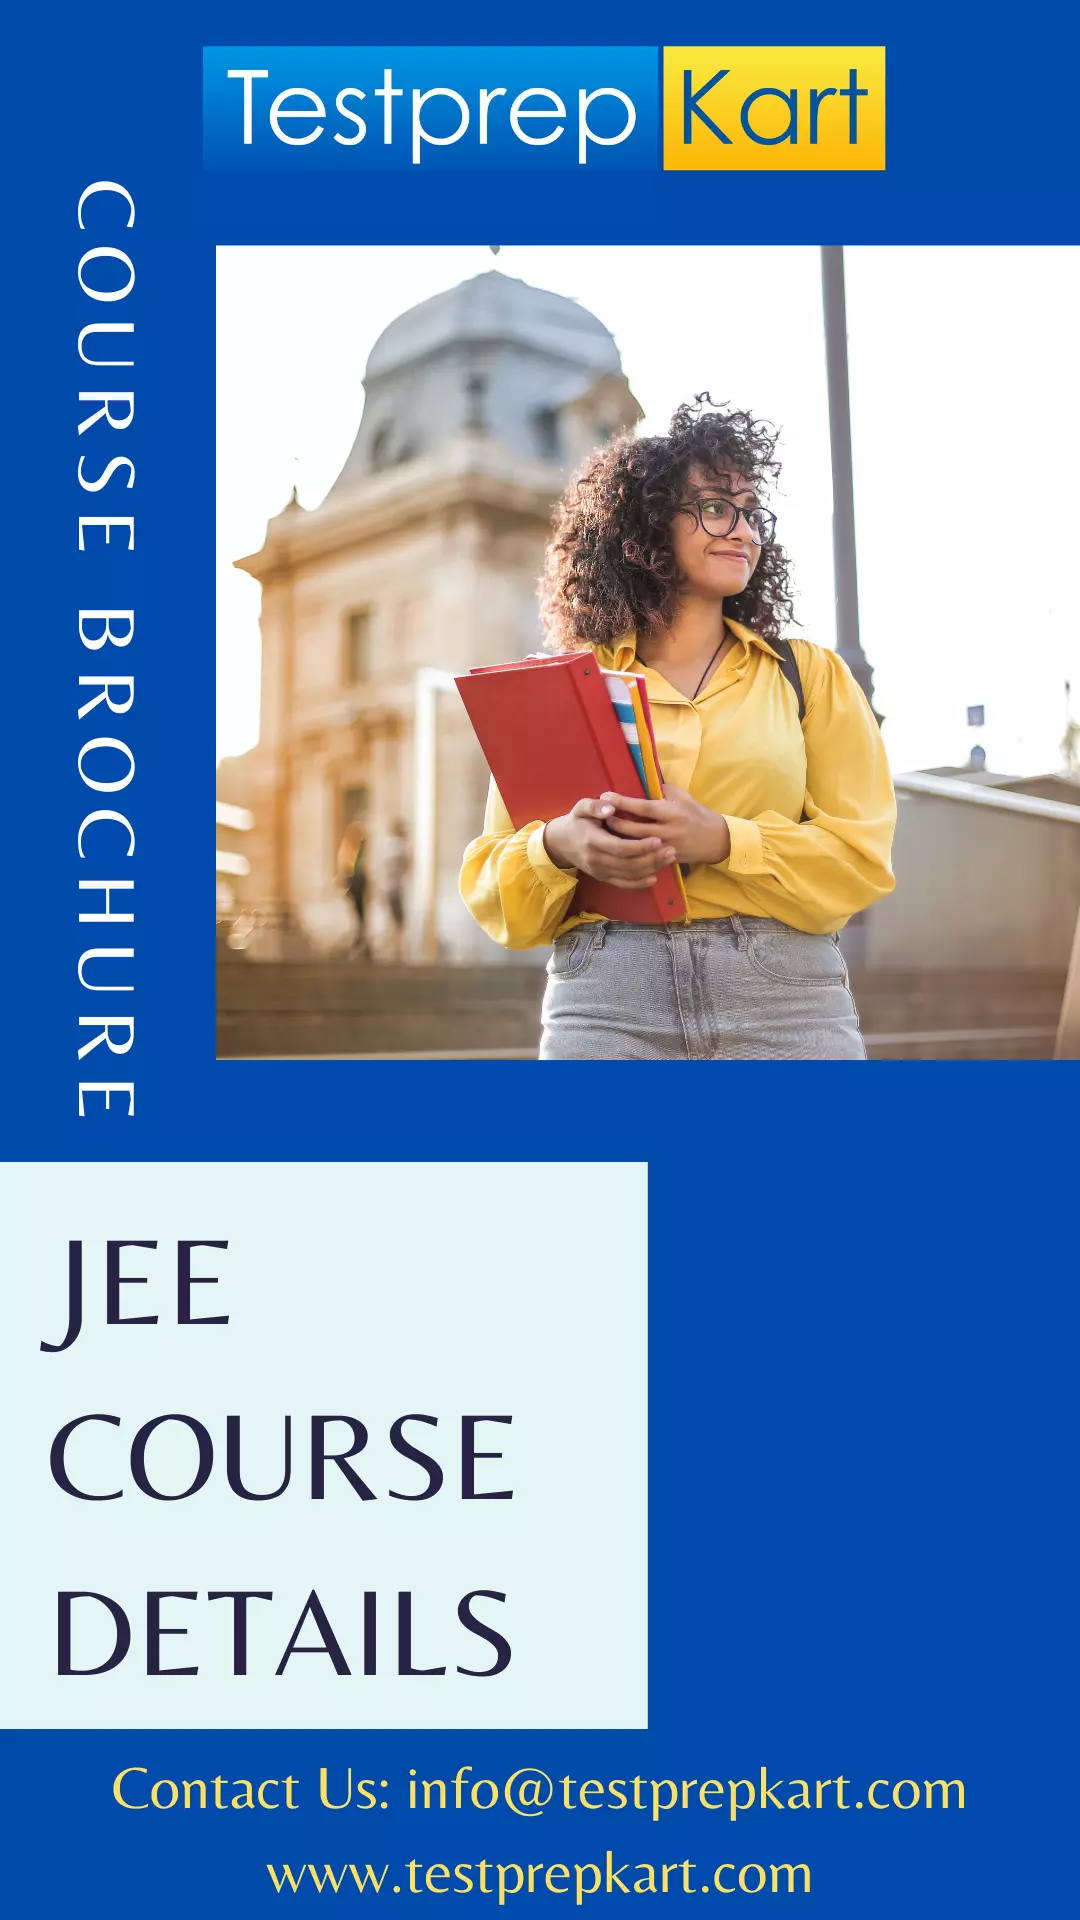 JEE Course Deatils